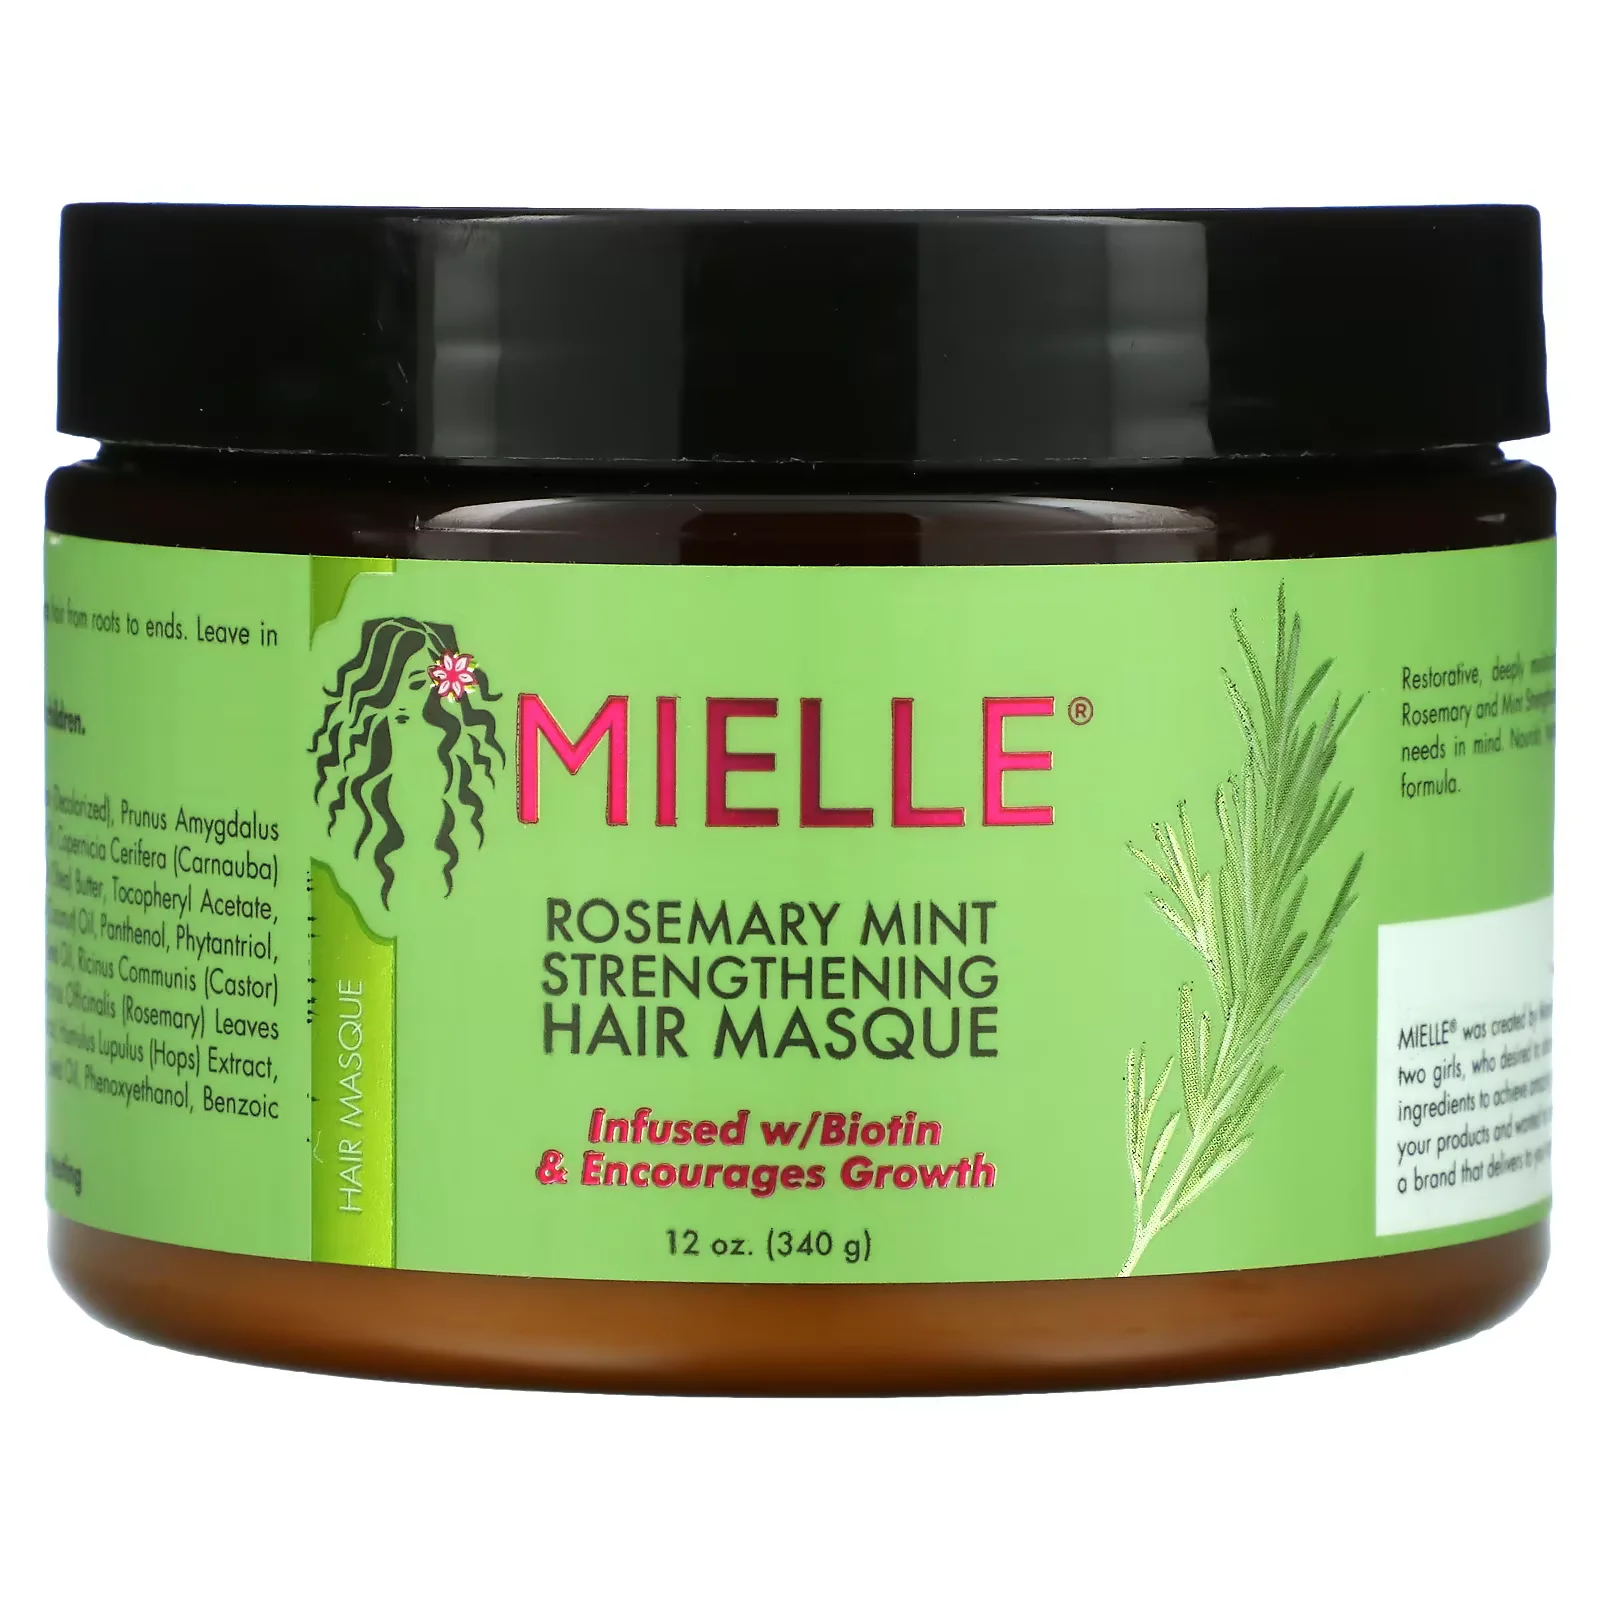 Mielle / Romarin et menthe fortifiante / Shampooing / Huile